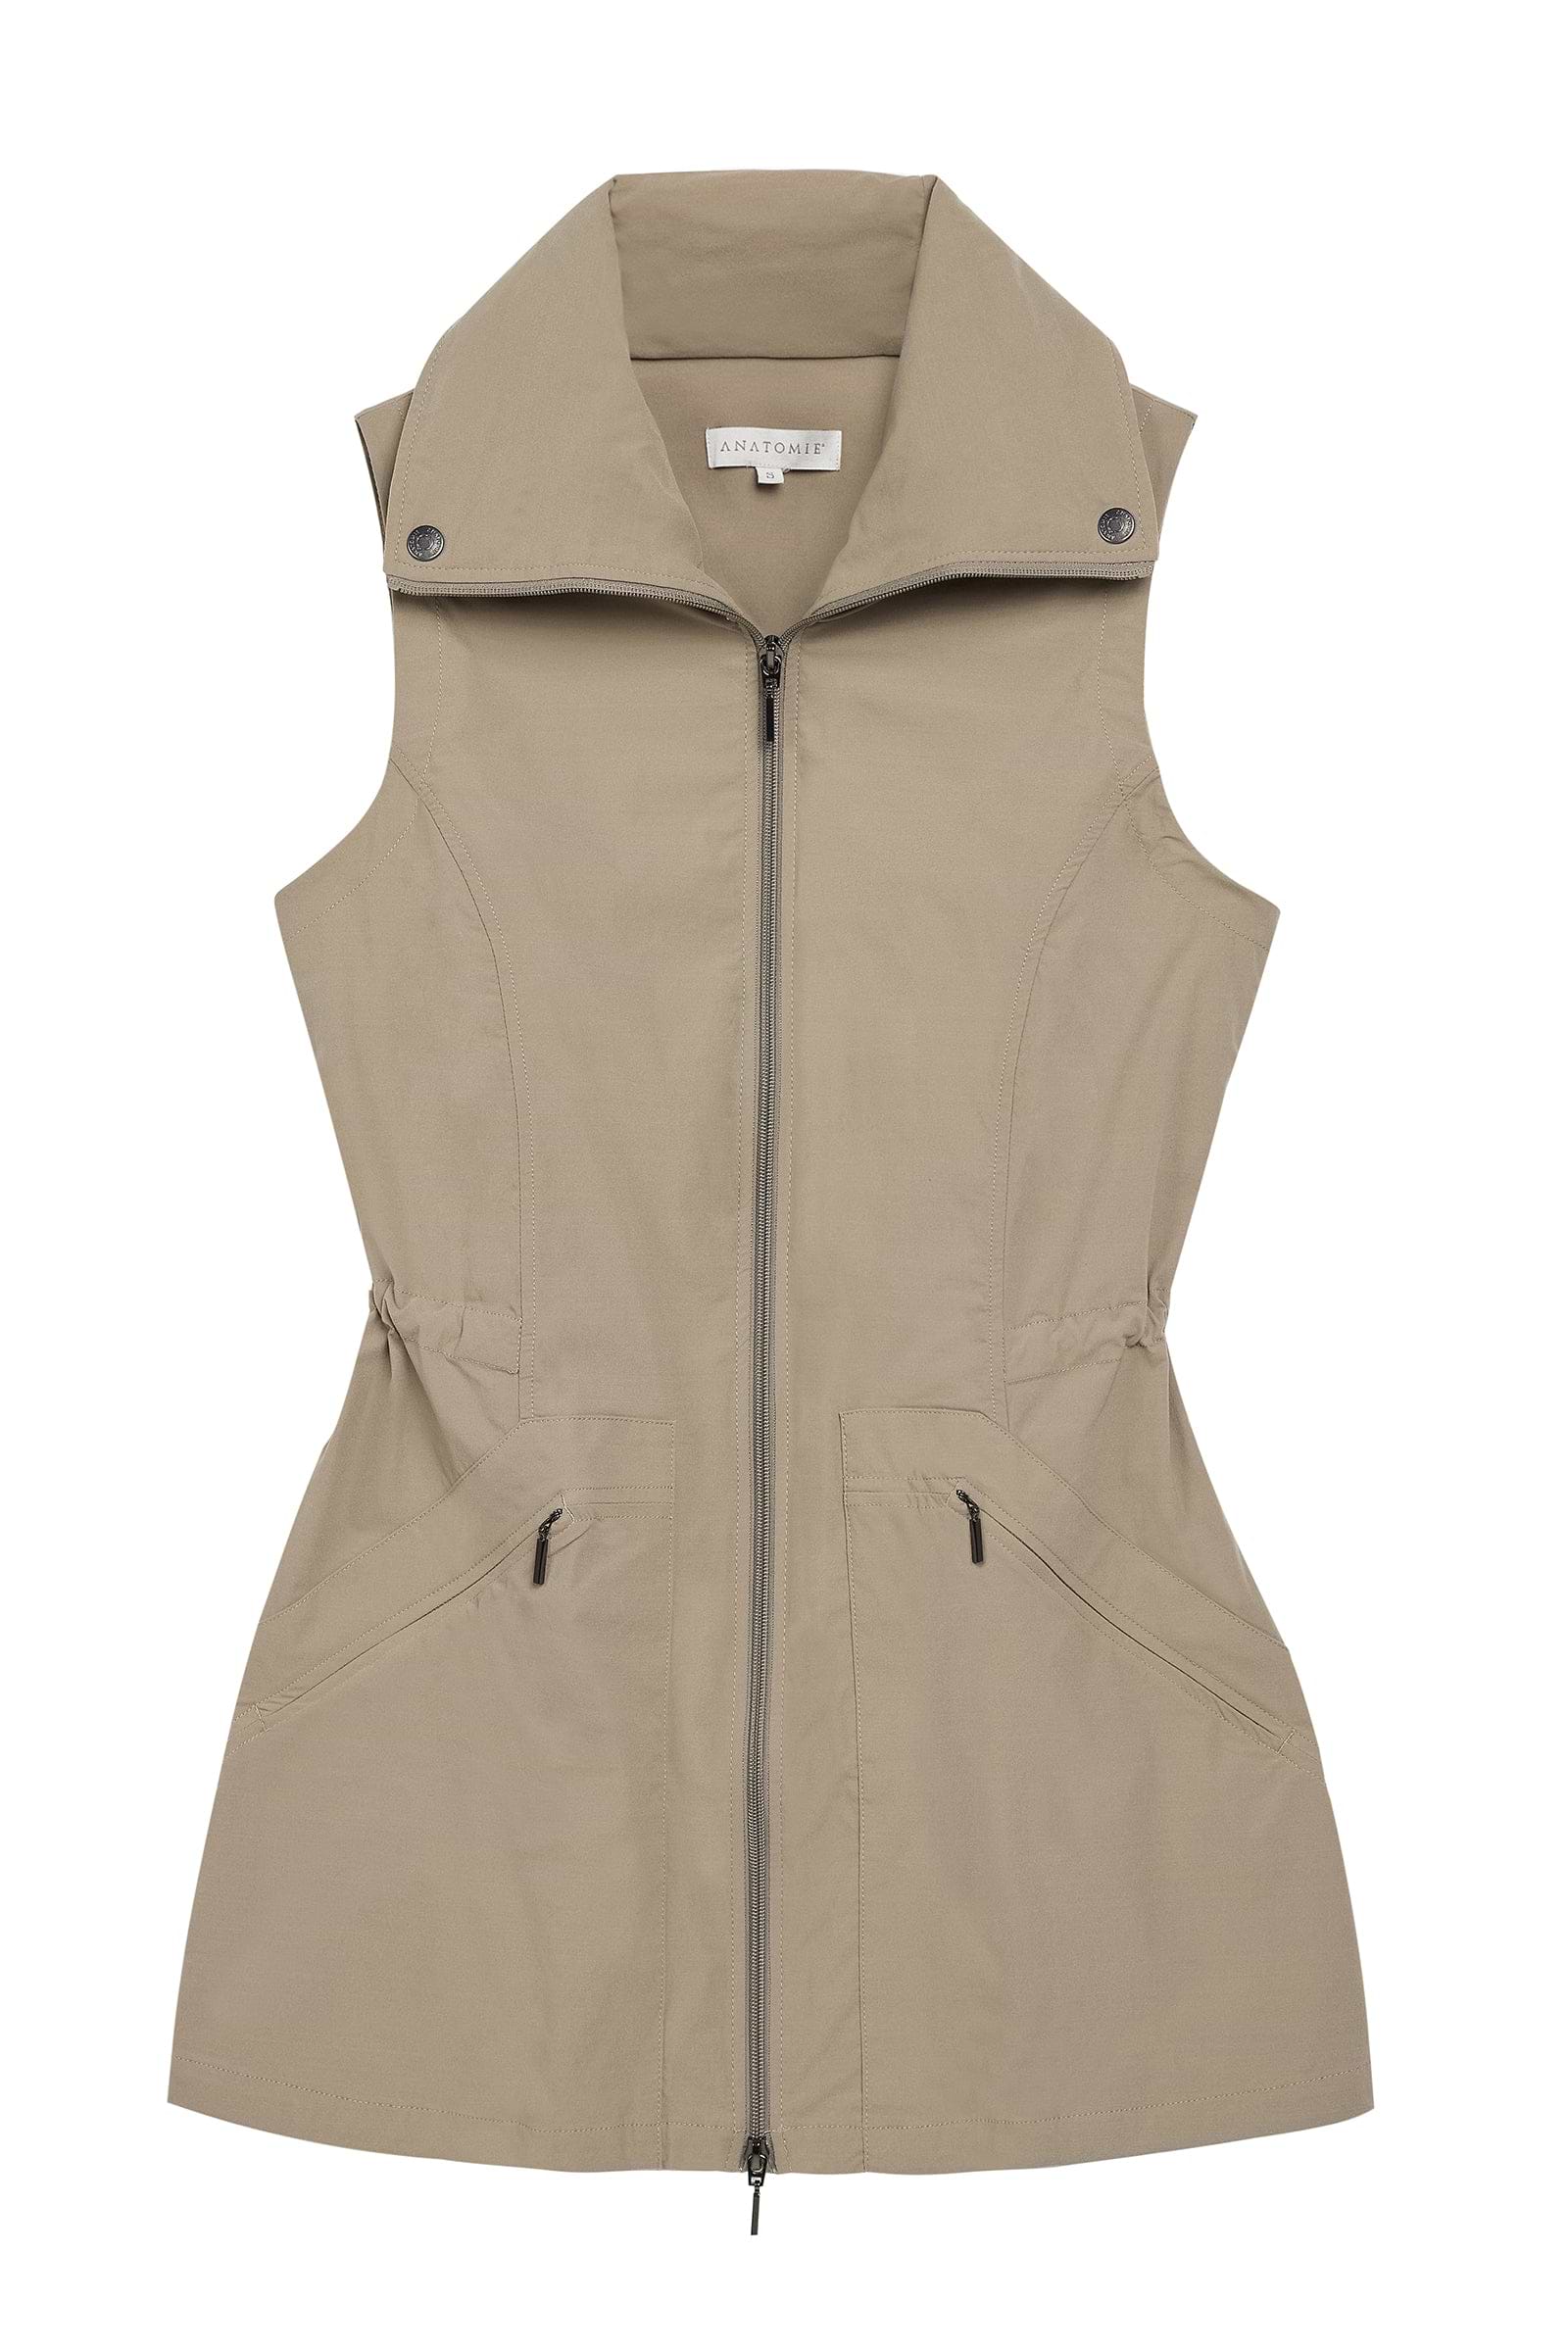 The Best Travel Vest. Flat Lay of a Delaney Travel Vest in Khaki